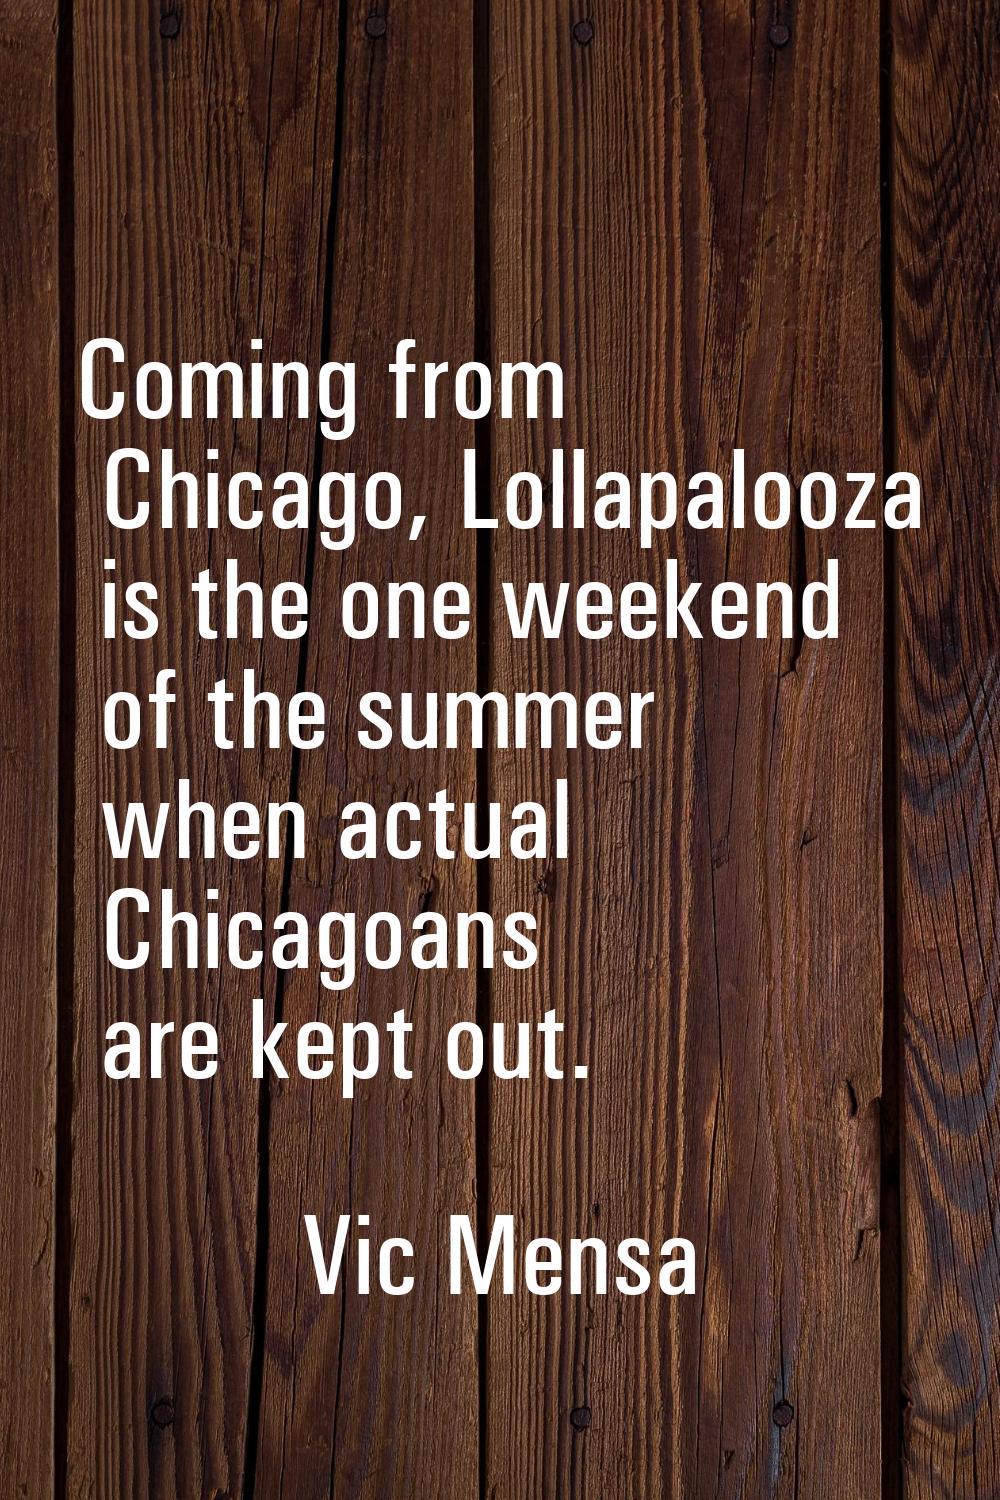 Coming from Chicago, Lollapalooza is the one weekend of the summer when actual Chicagoans are kept 